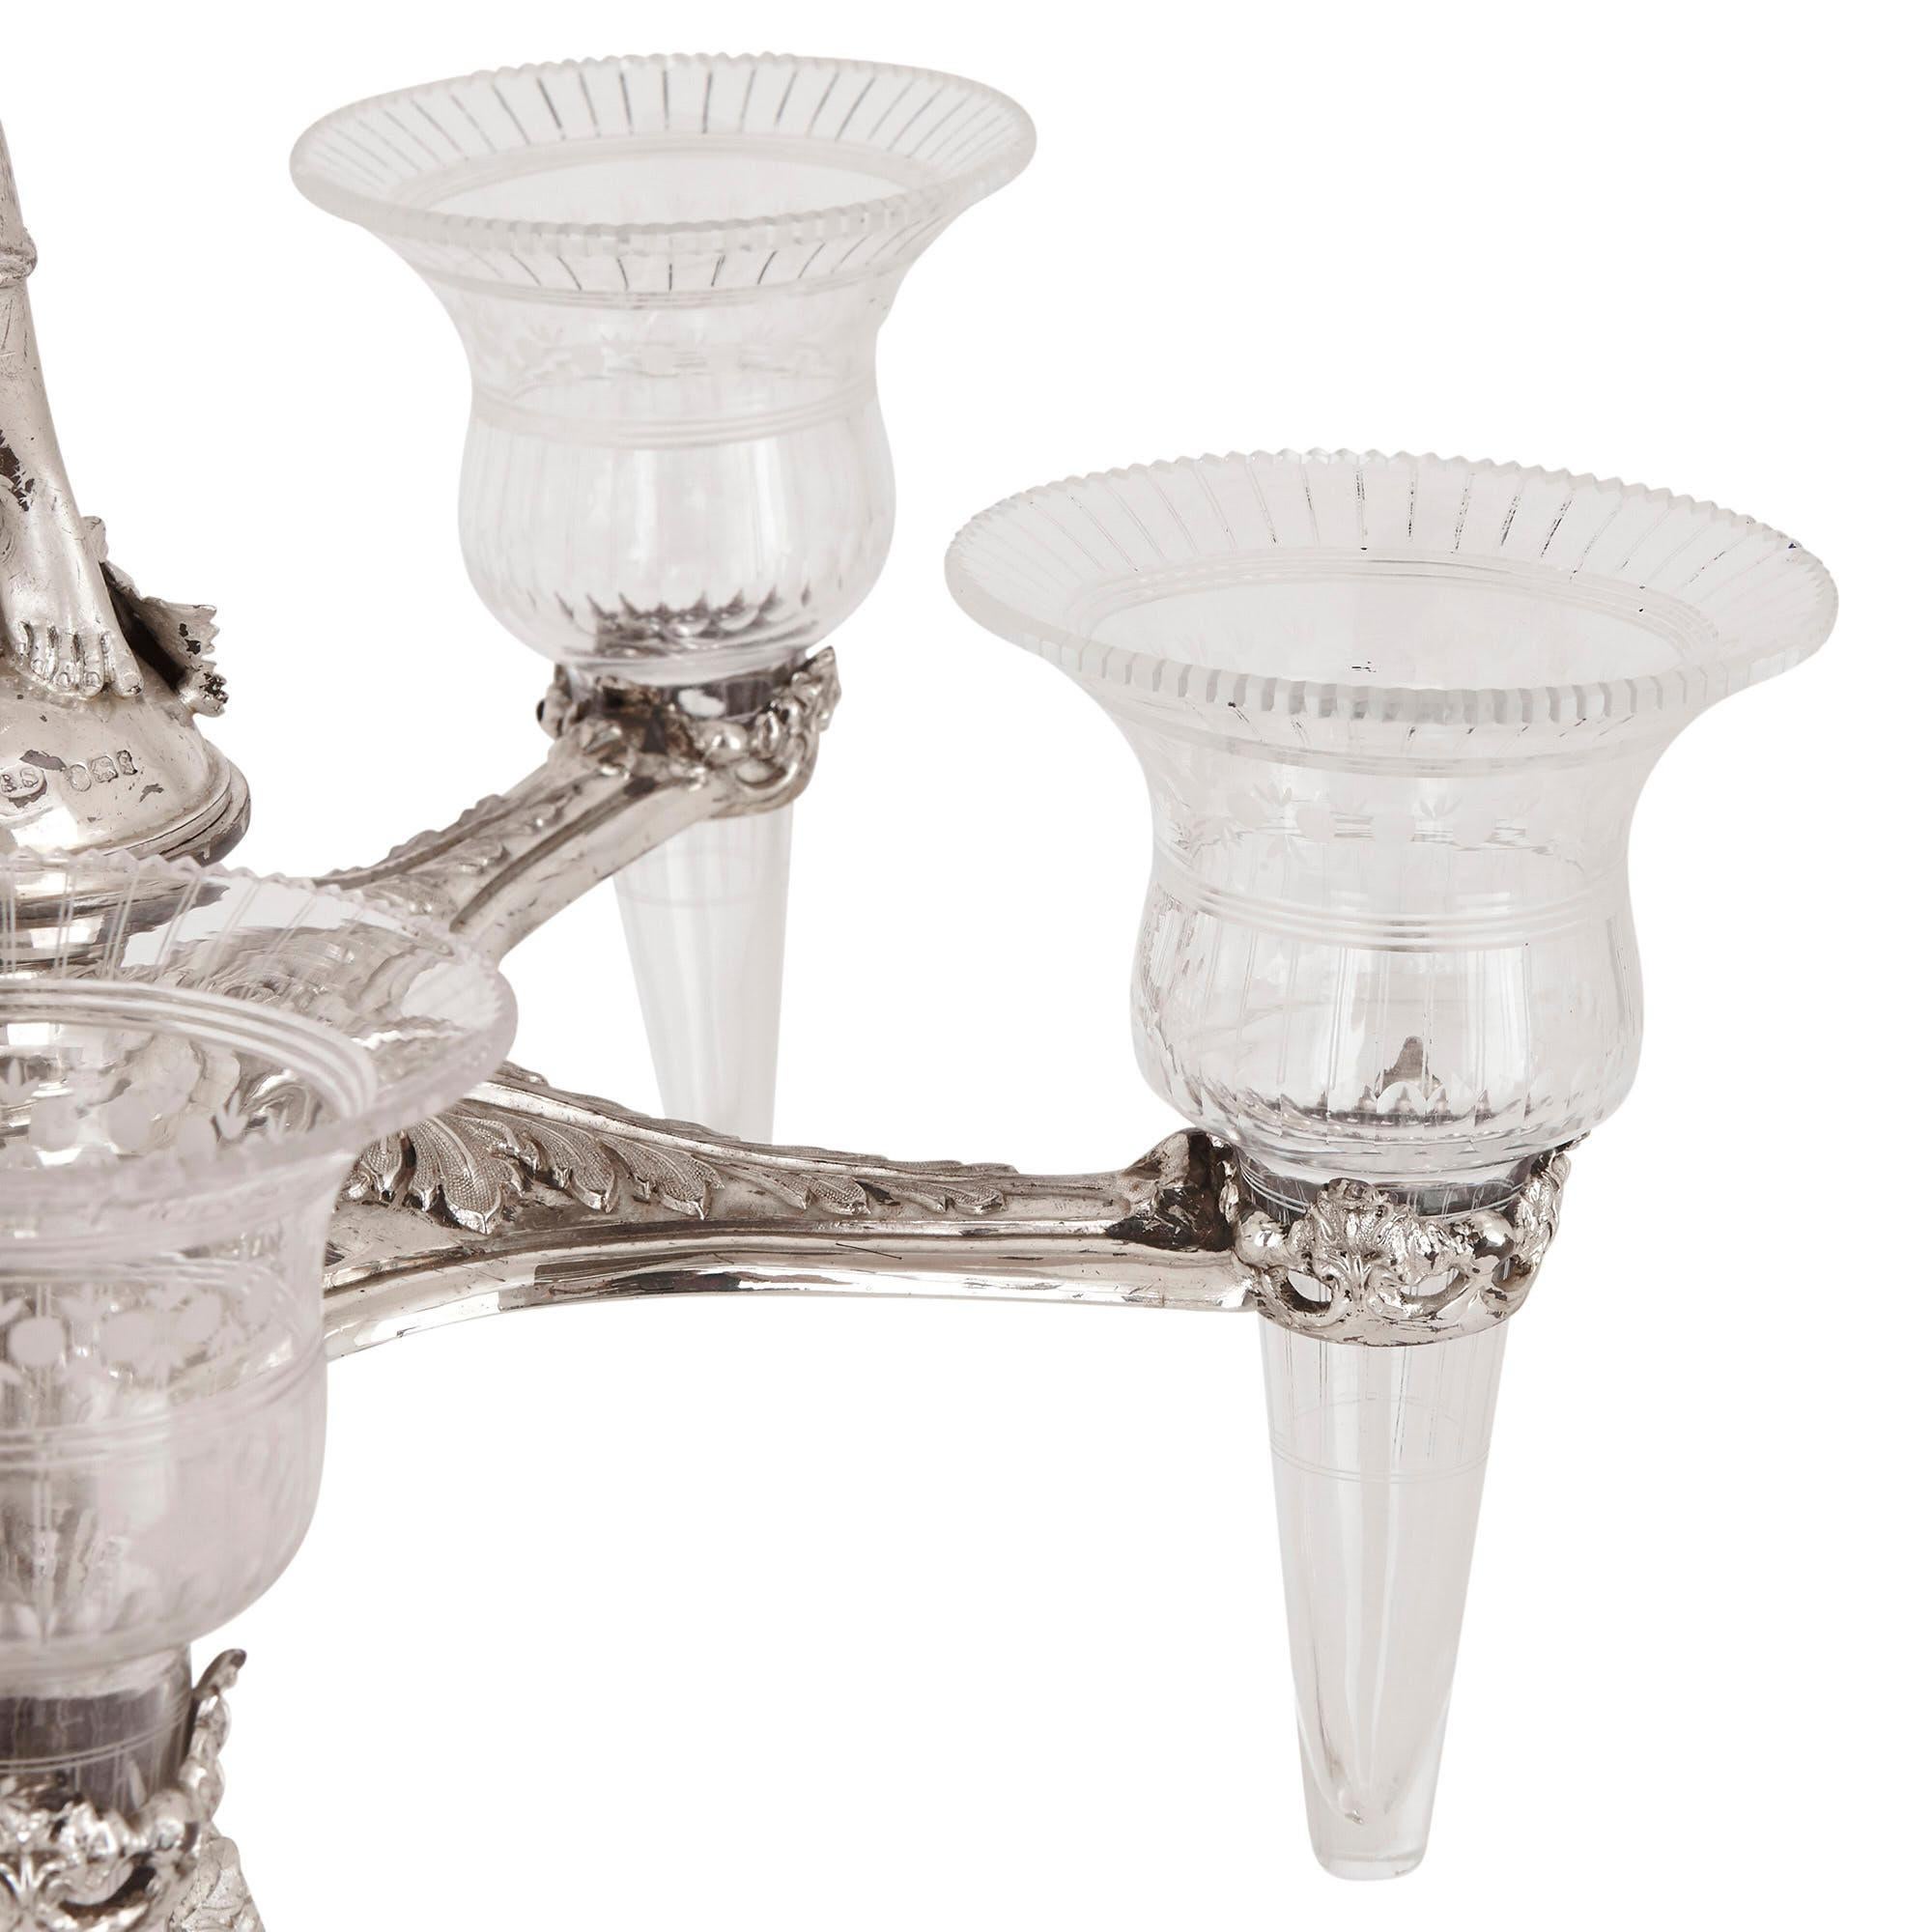 Neoclassical Silver and glass epergne by Stephen Smith & Son of London